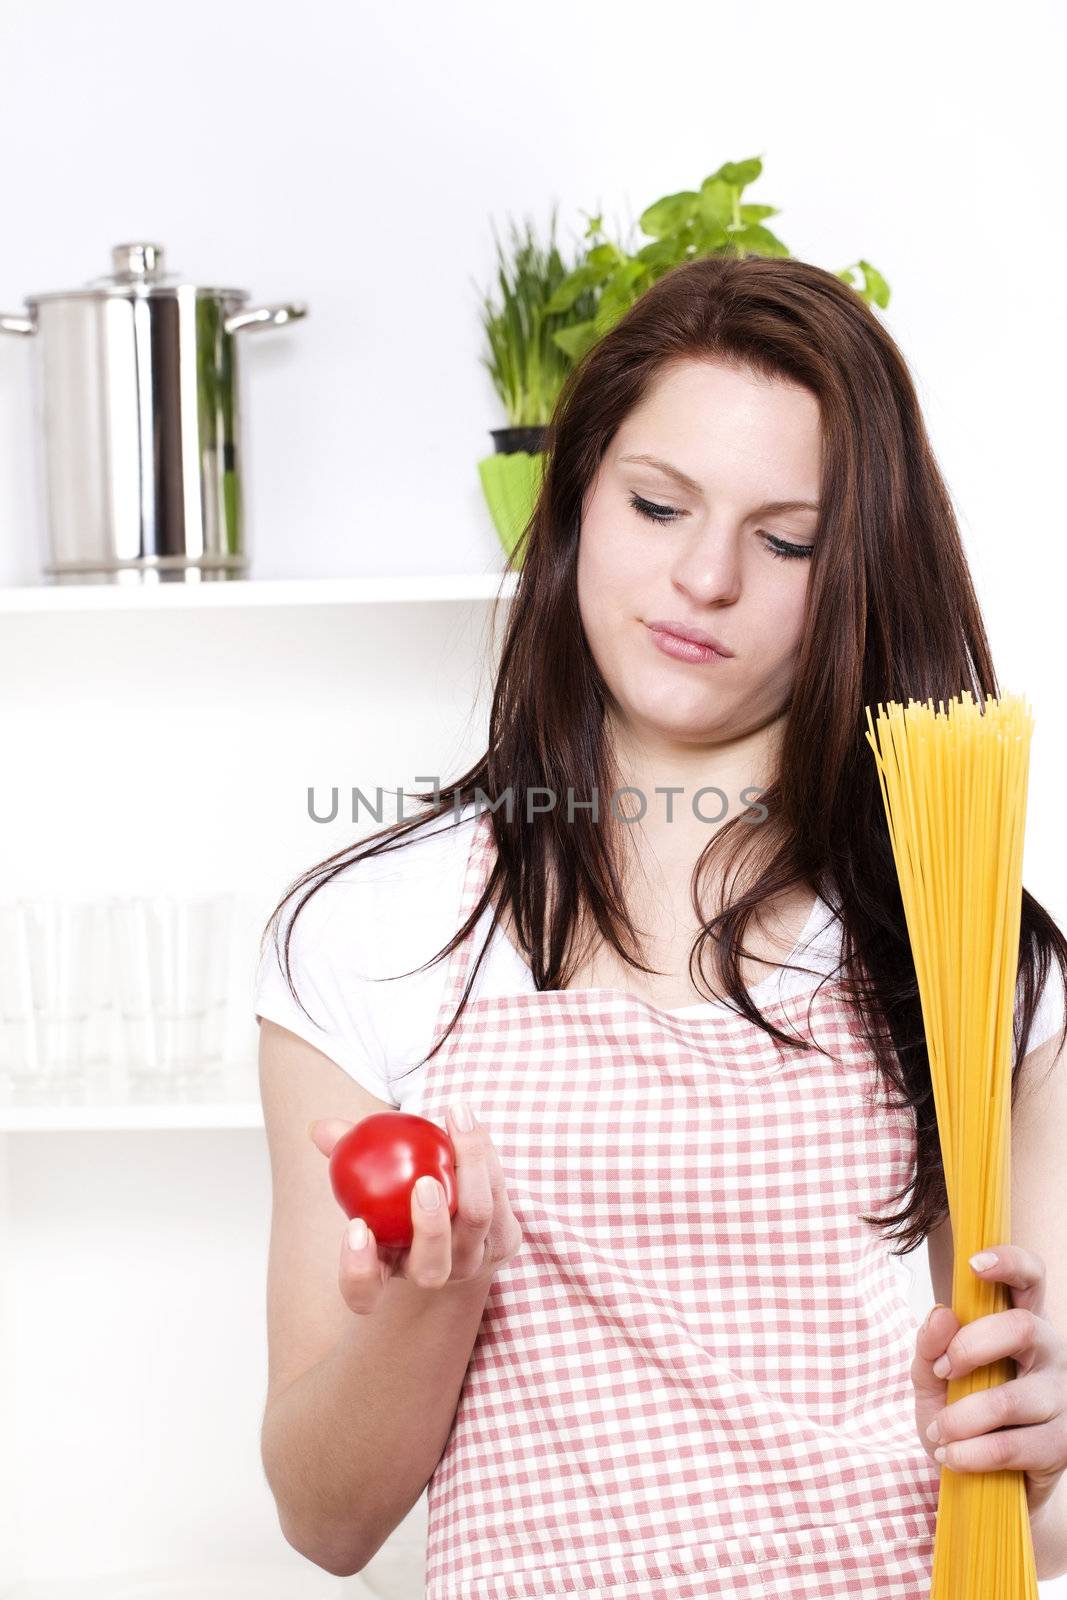 young woman holding spaghetti and tomato looking at the tomato